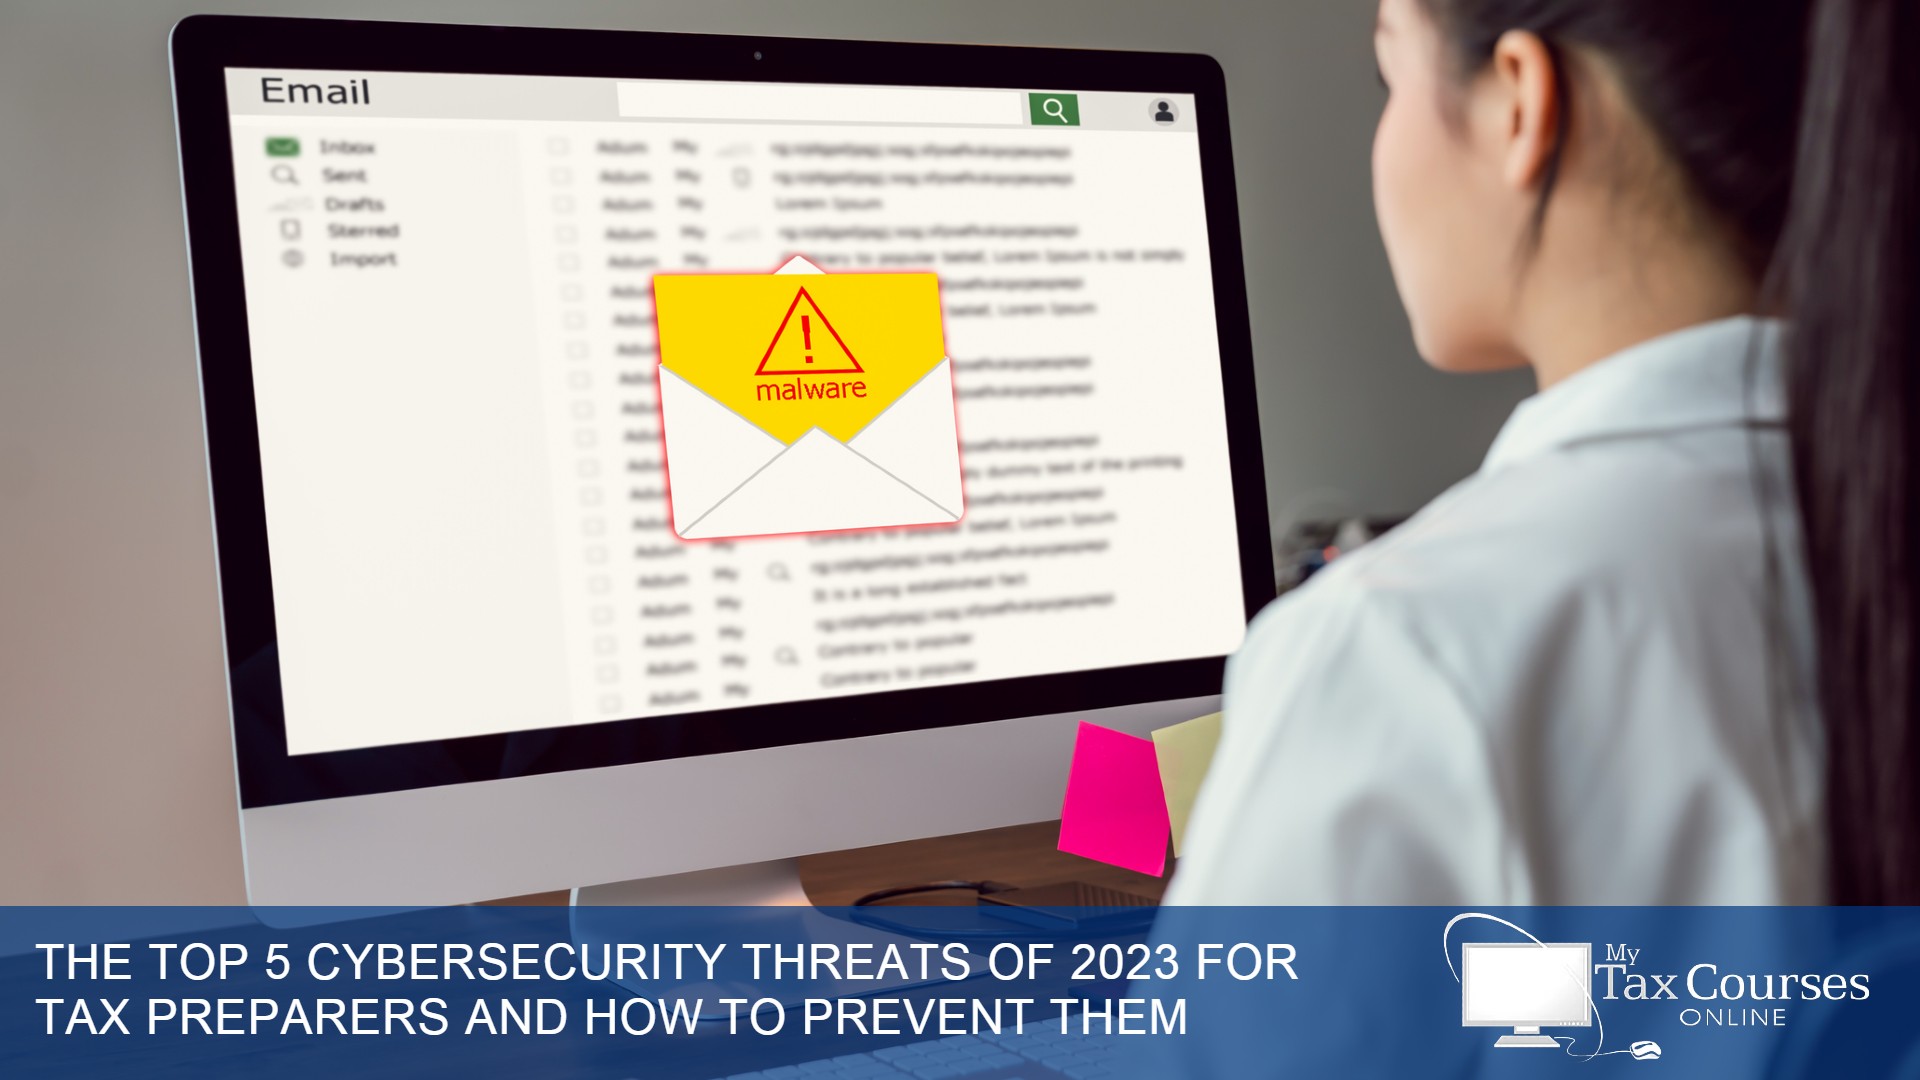 The Top 5 Cybersecurity Threats of 2023 for Tax Preparers and How to Prevent Them